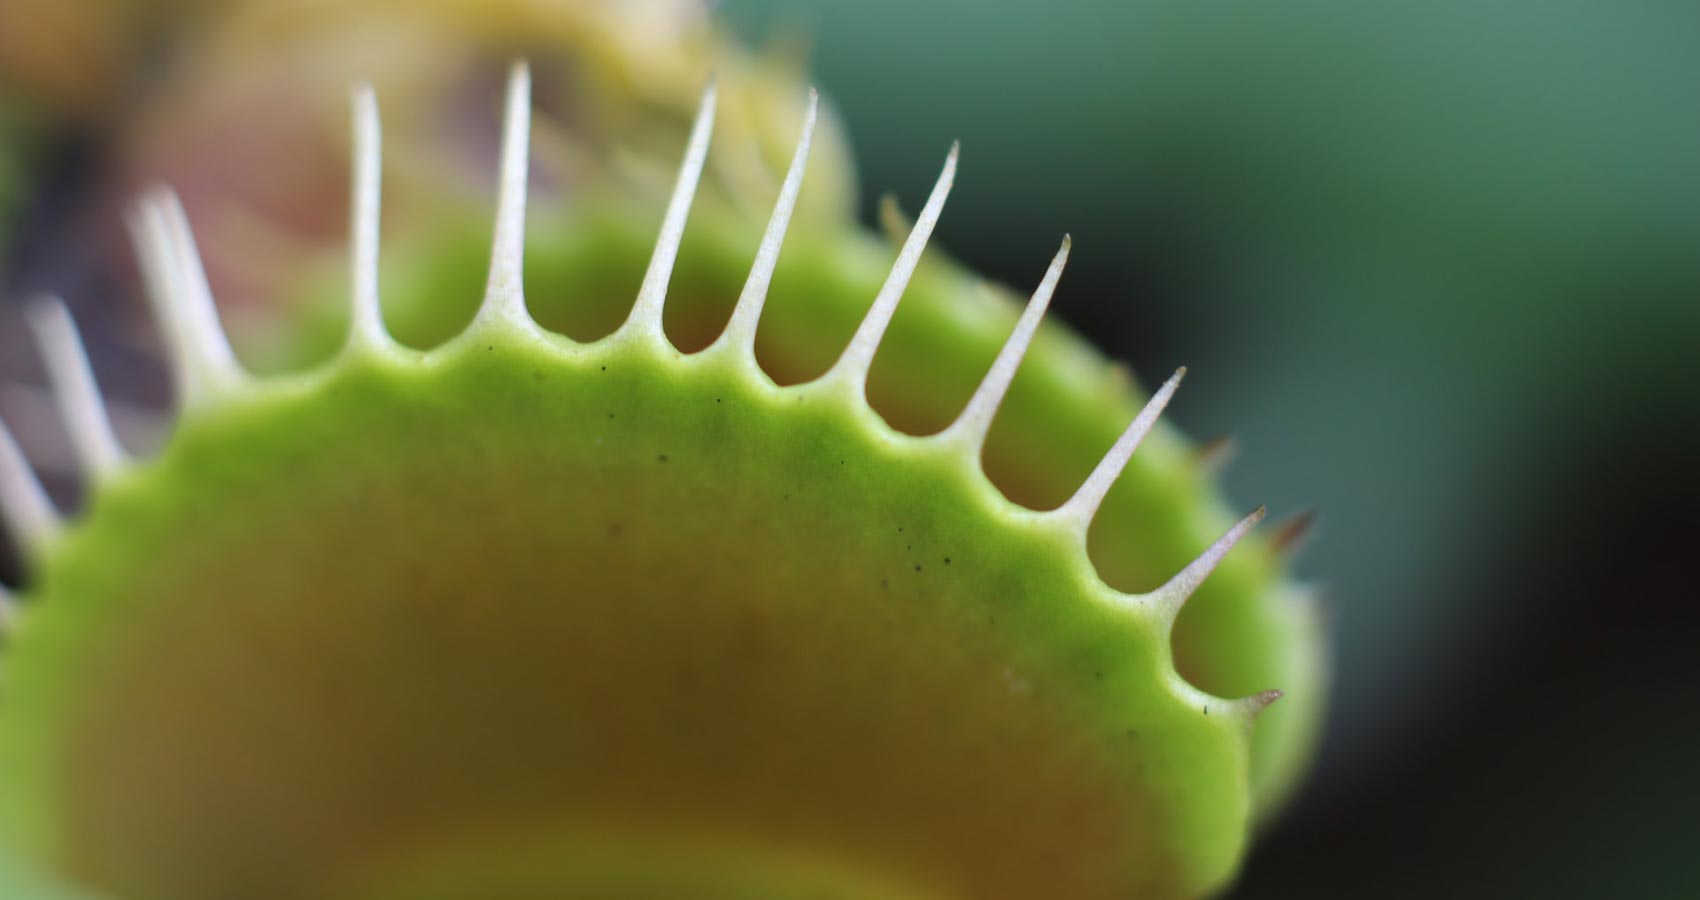 Venus Flytrap, poetry by Eric Johnson at Spillwords.com